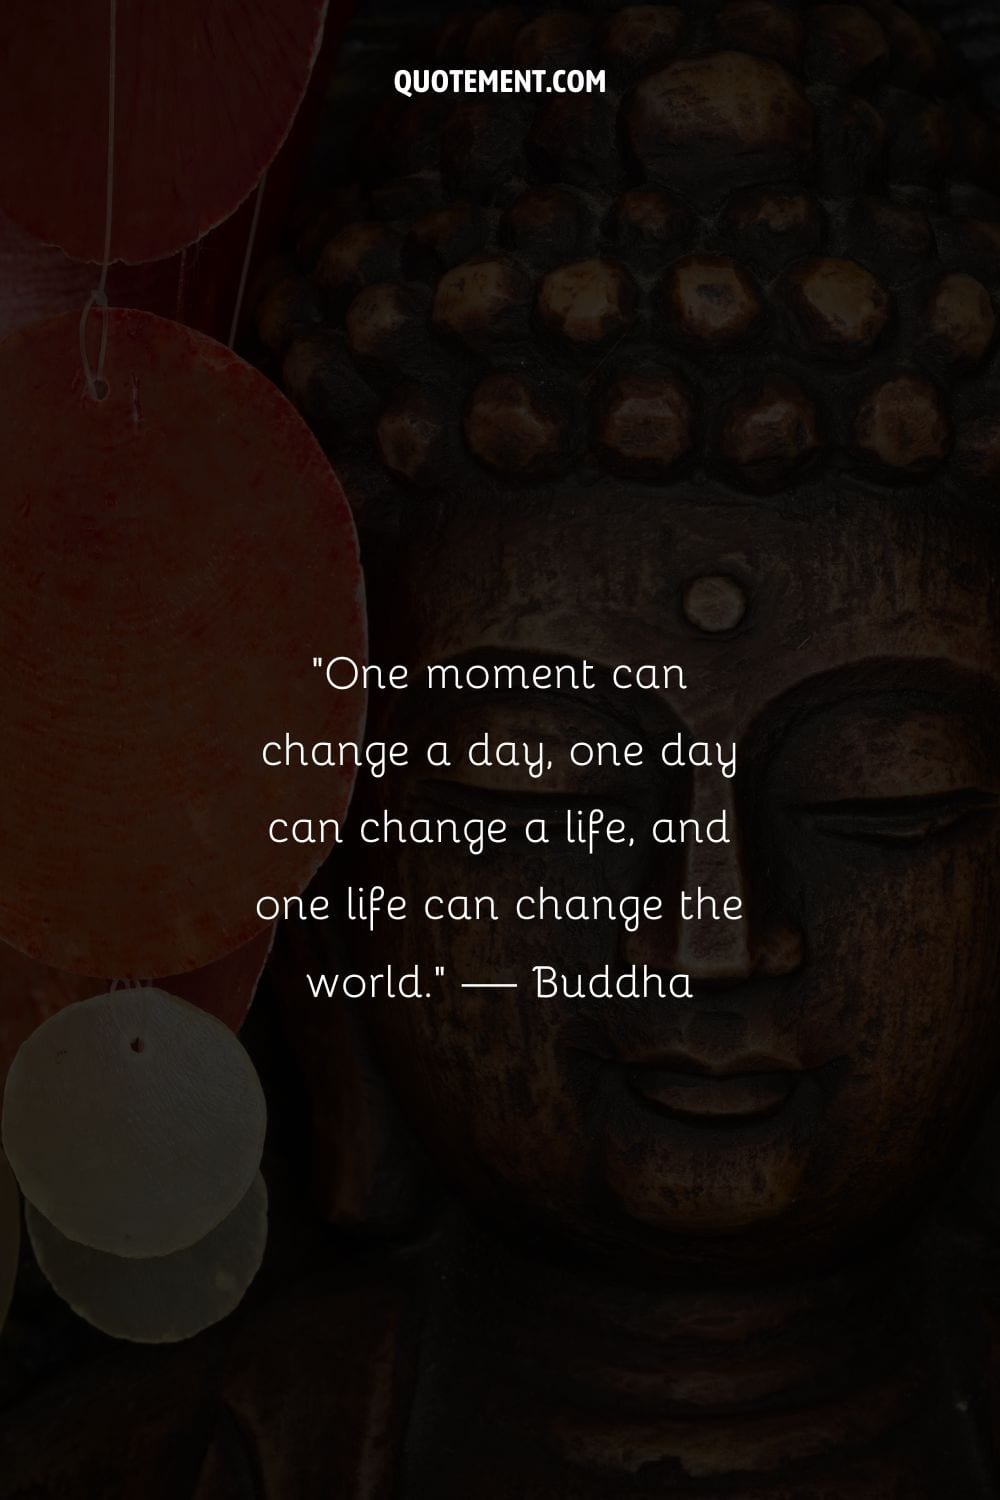 Buddha image representing one of the most powerful buddhist quote.